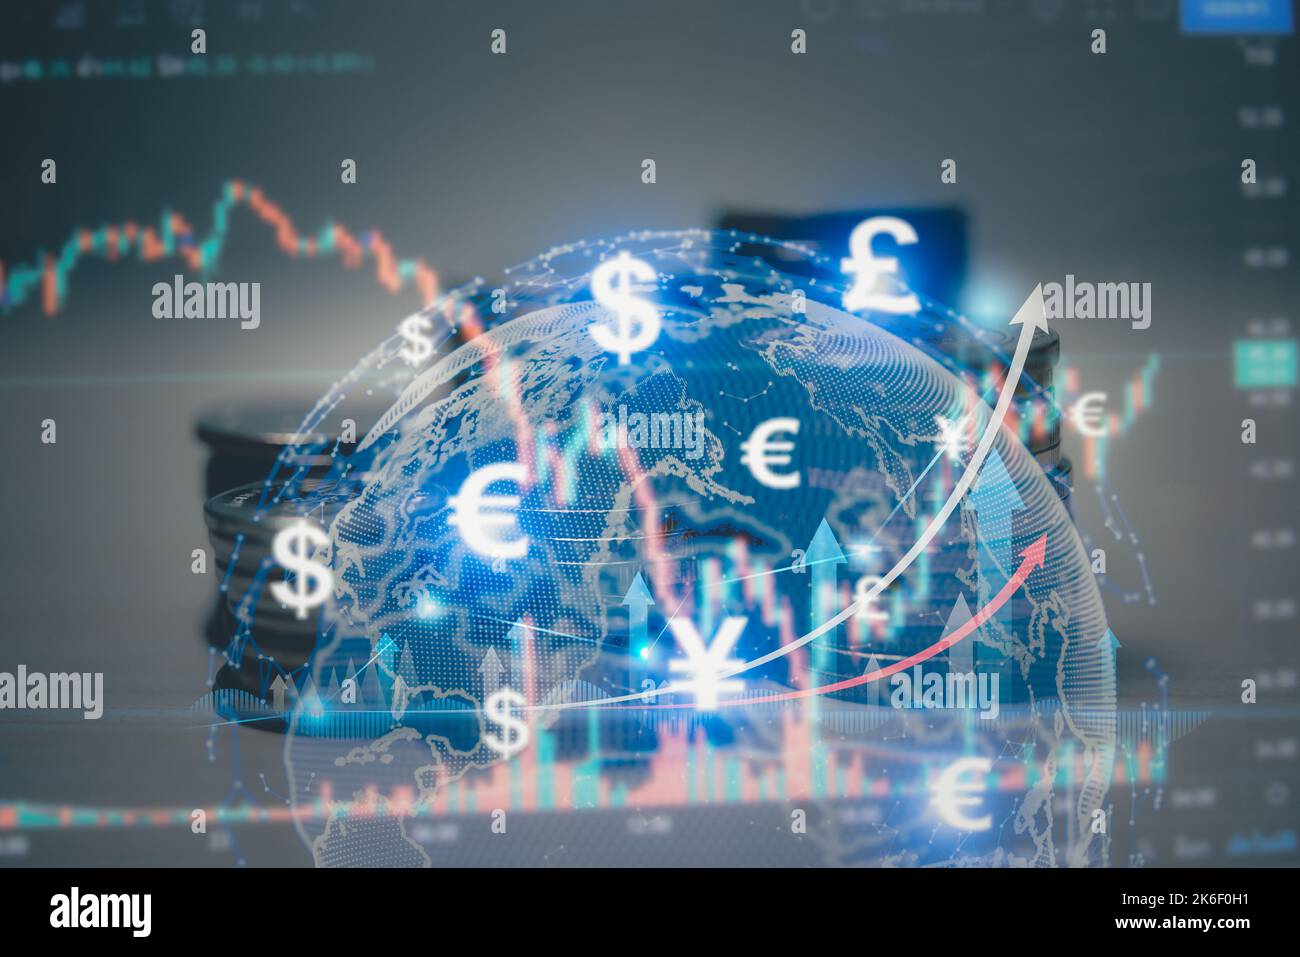 Finance trade price financial transfer technology, person economy investment payment foreign market access analysis. Stock Photo